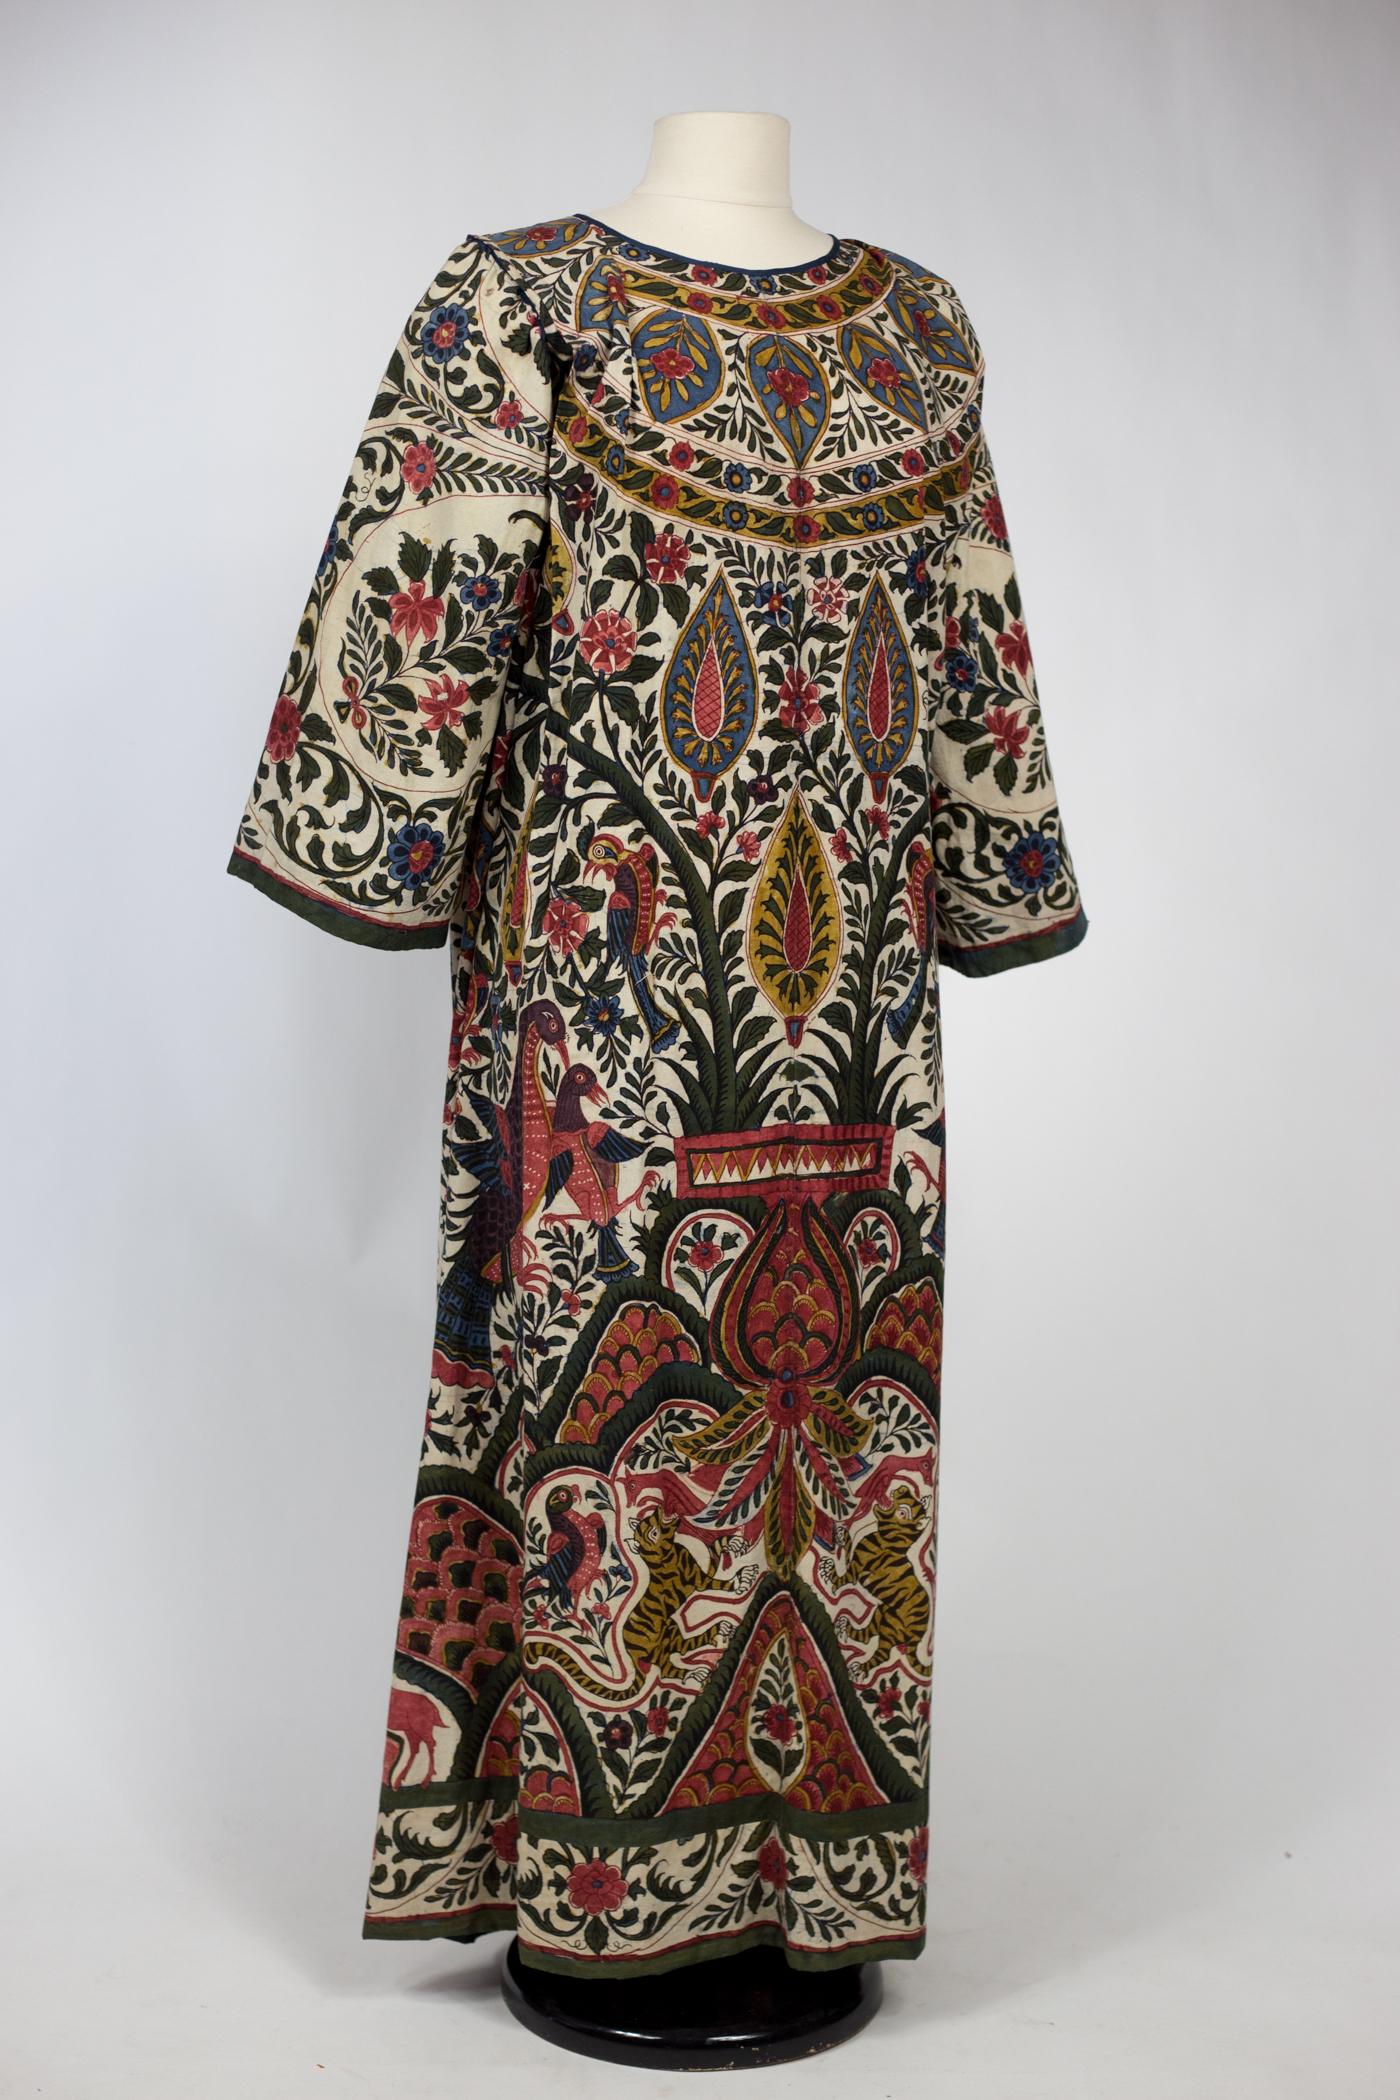 Circa 1900 for the Cut
Circa 1820/1850 for the fabric

India for Fashion in the West

Amazing kaftan dress made in a Palempore from the Indies in Painted cotton Chintz. Beautiful tree of life with intact colors and made according to the know-how of